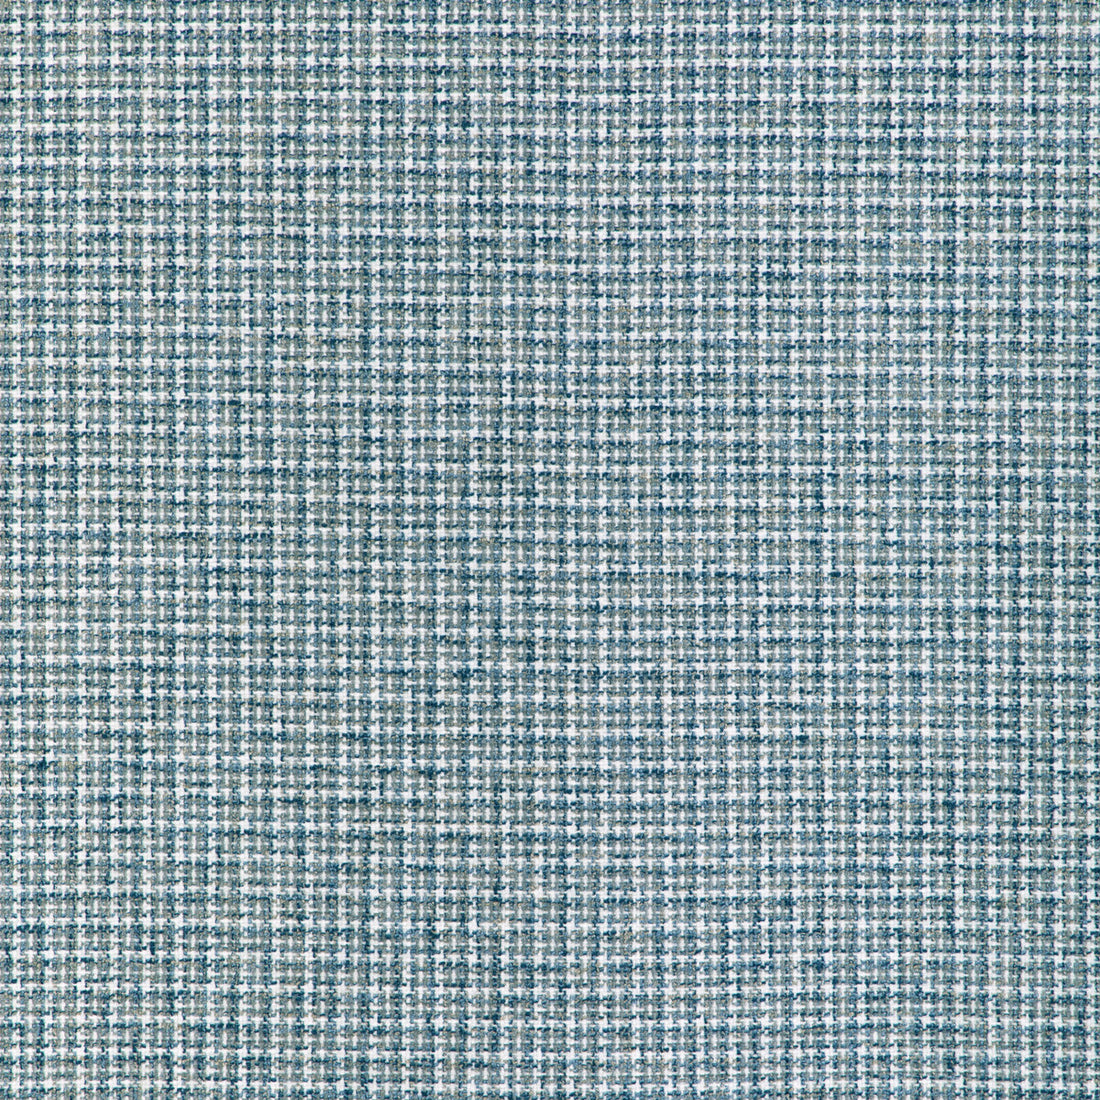 Aria Check fabric in indigo color - pattern 36950.5.0 - by Kravet Basics in the Mid-Century Modern collection